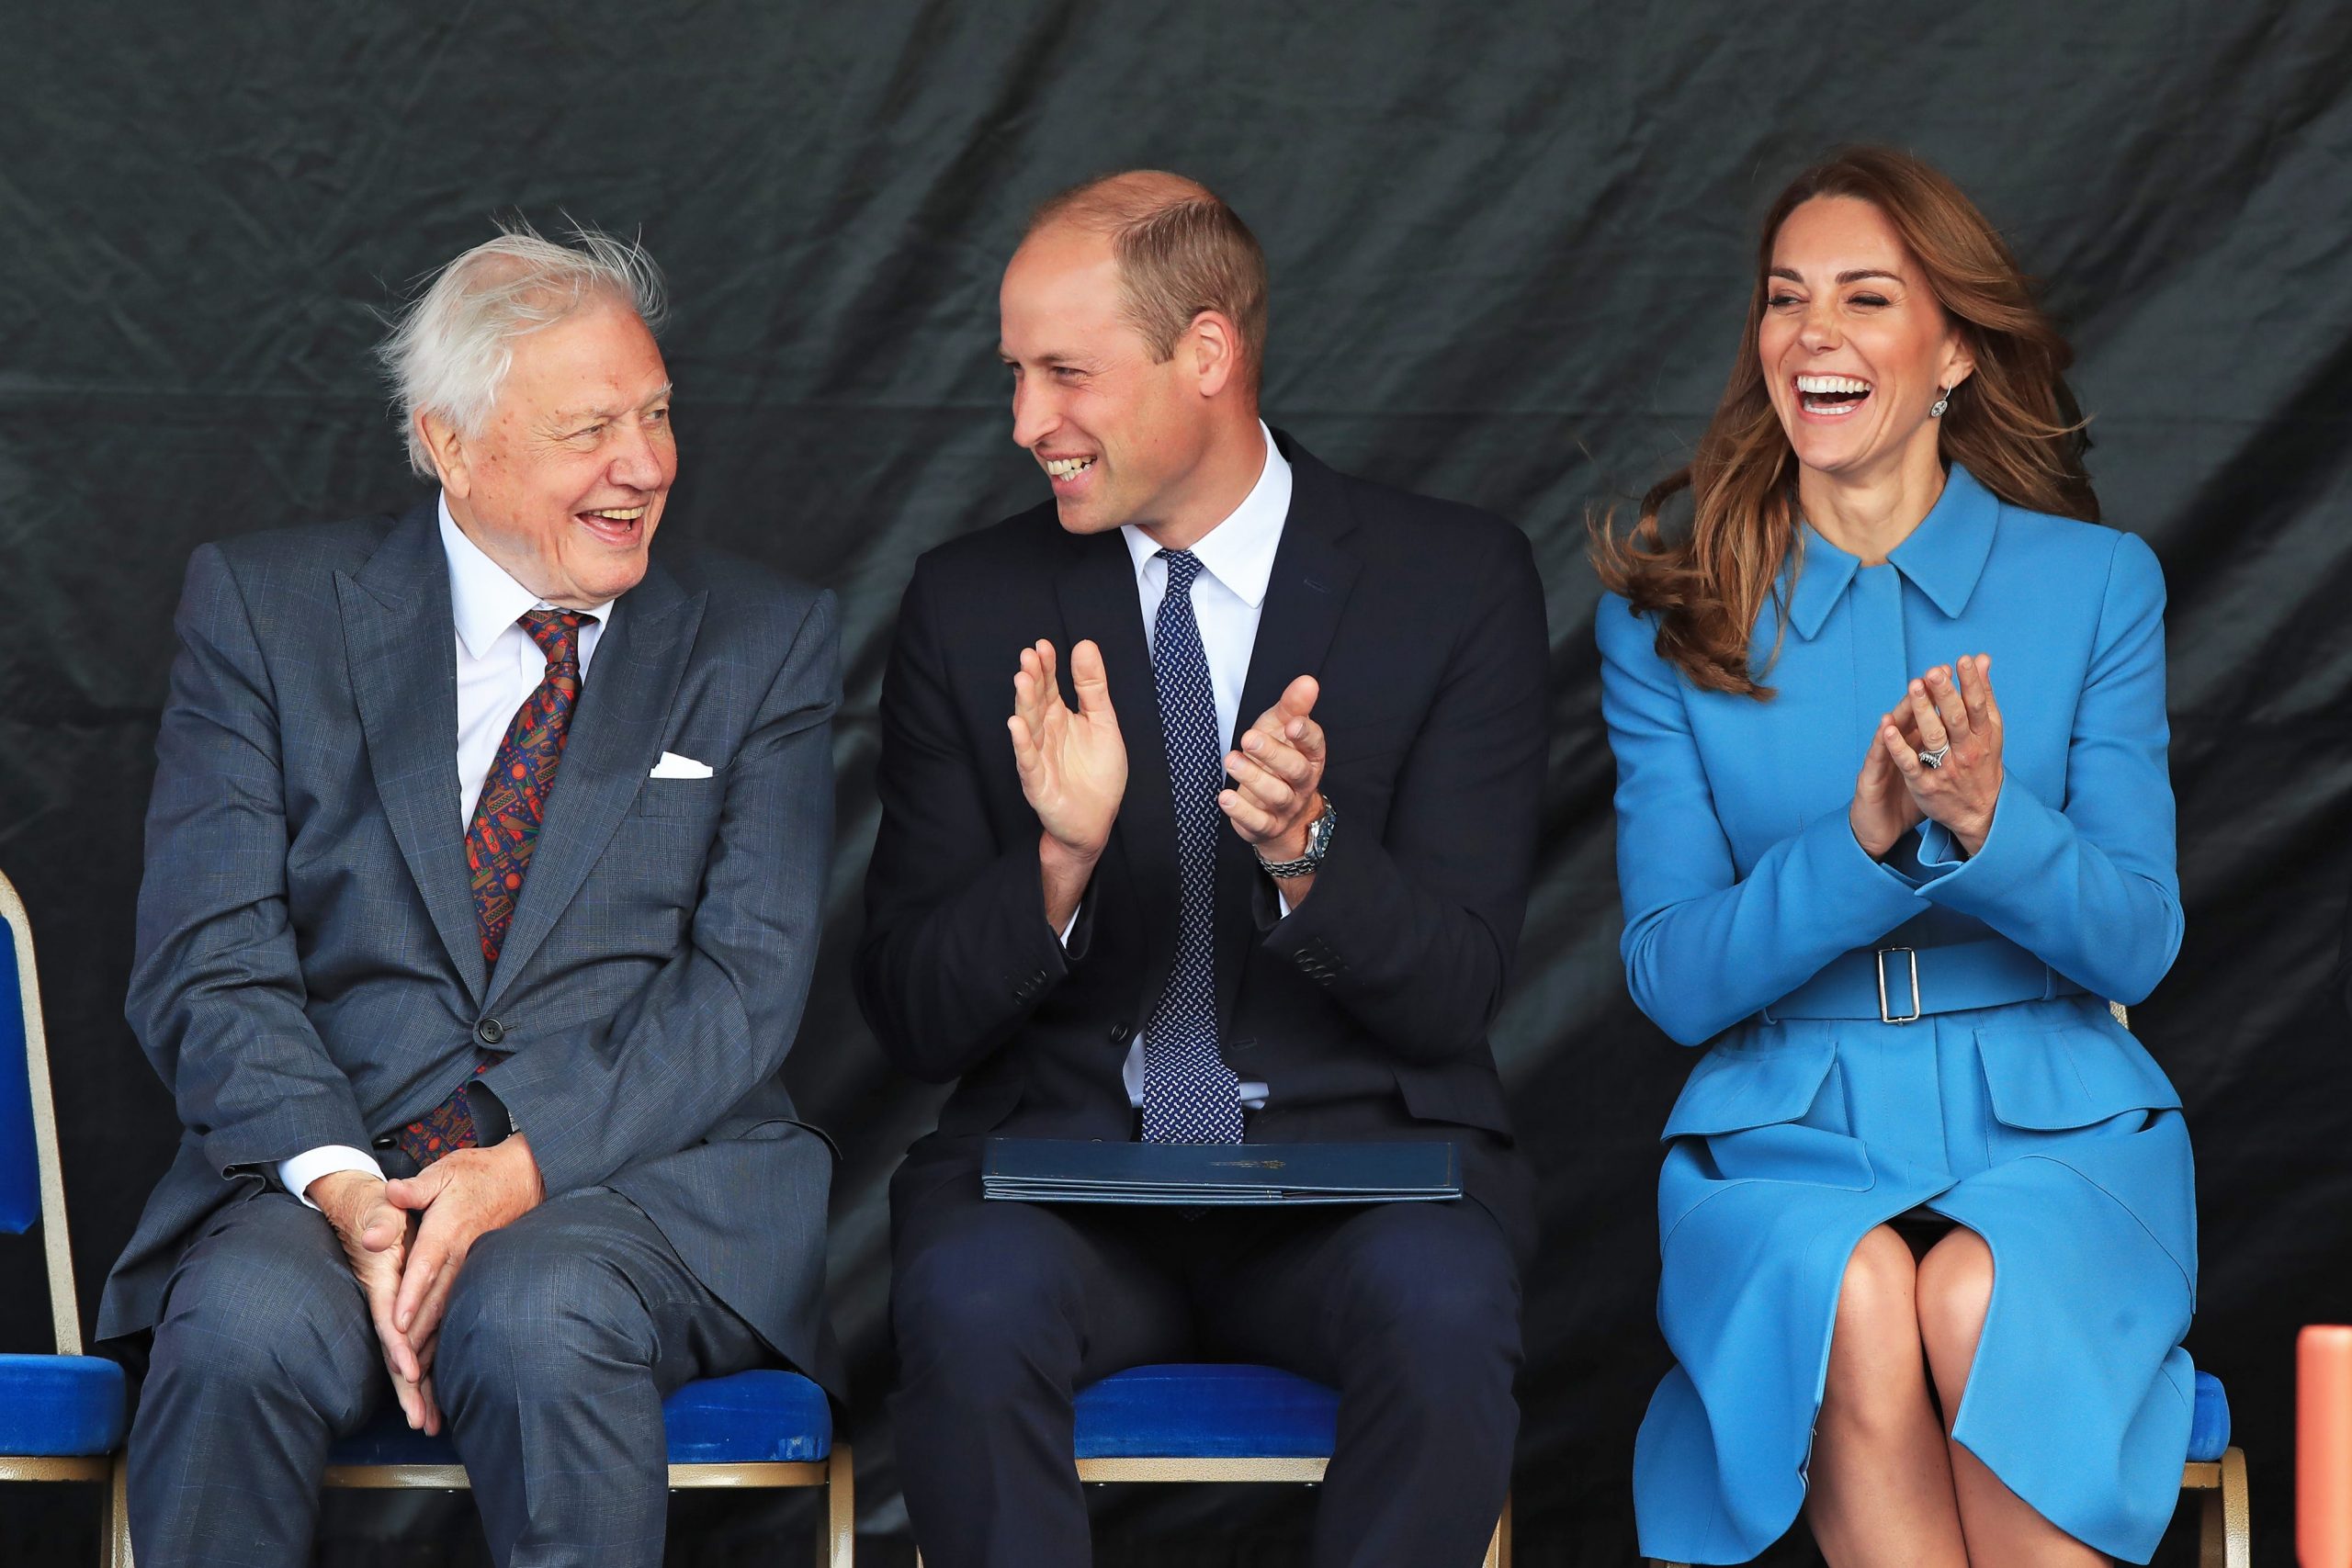 Sir David Attenborough (left) sitting next to Prince William (center) and Kate Middleton (right) in September 2019.